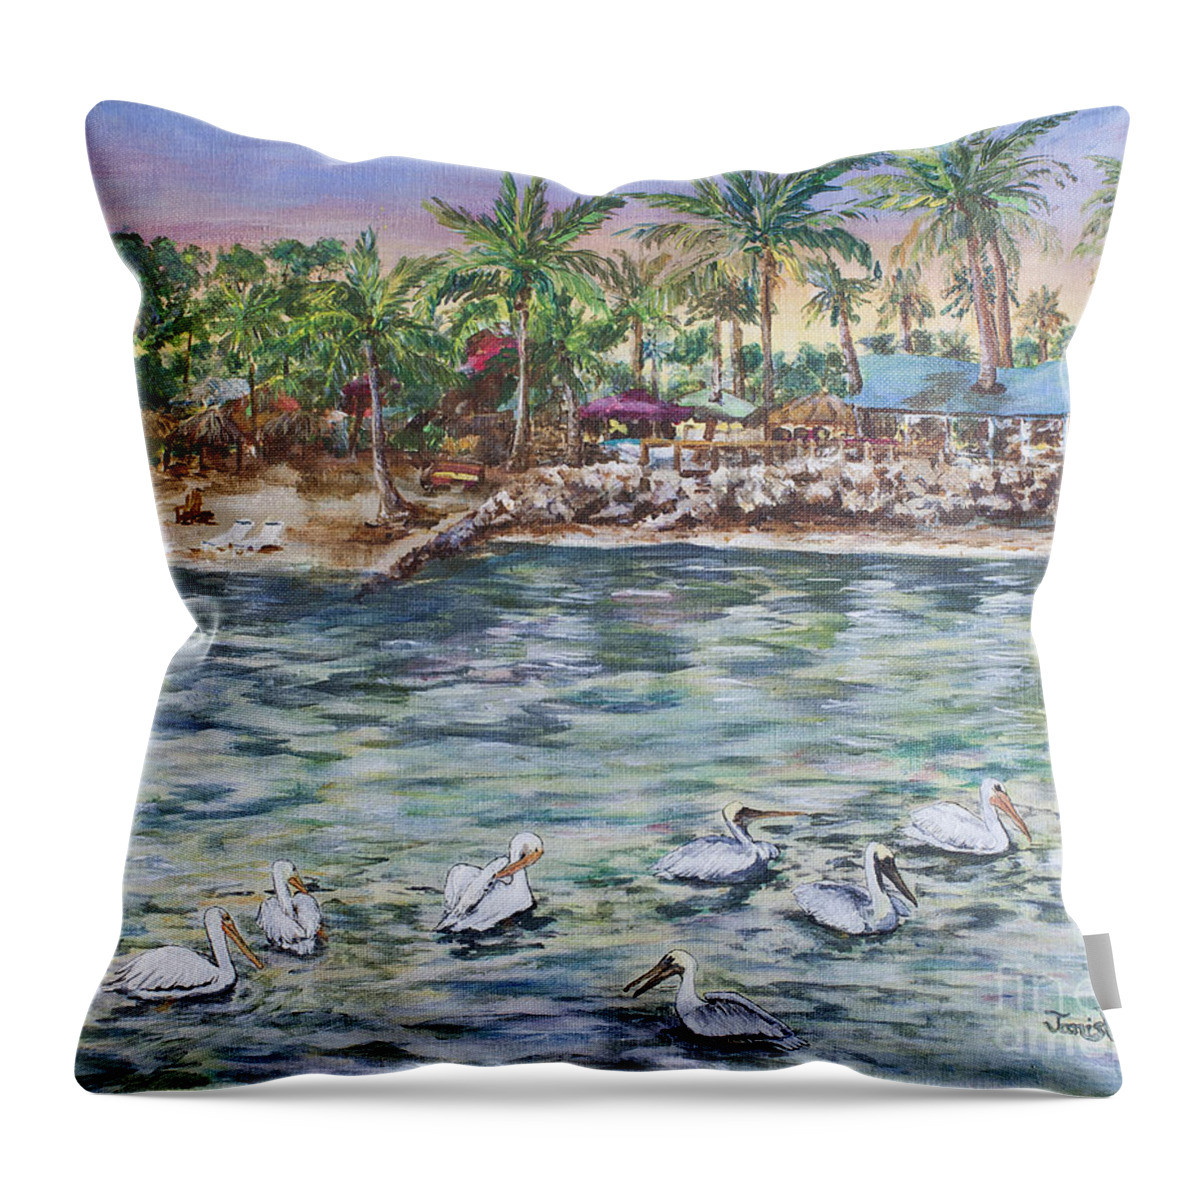 Pelican Throw Pillow featuring the painting Pelican Medley by Janis Lee Colon